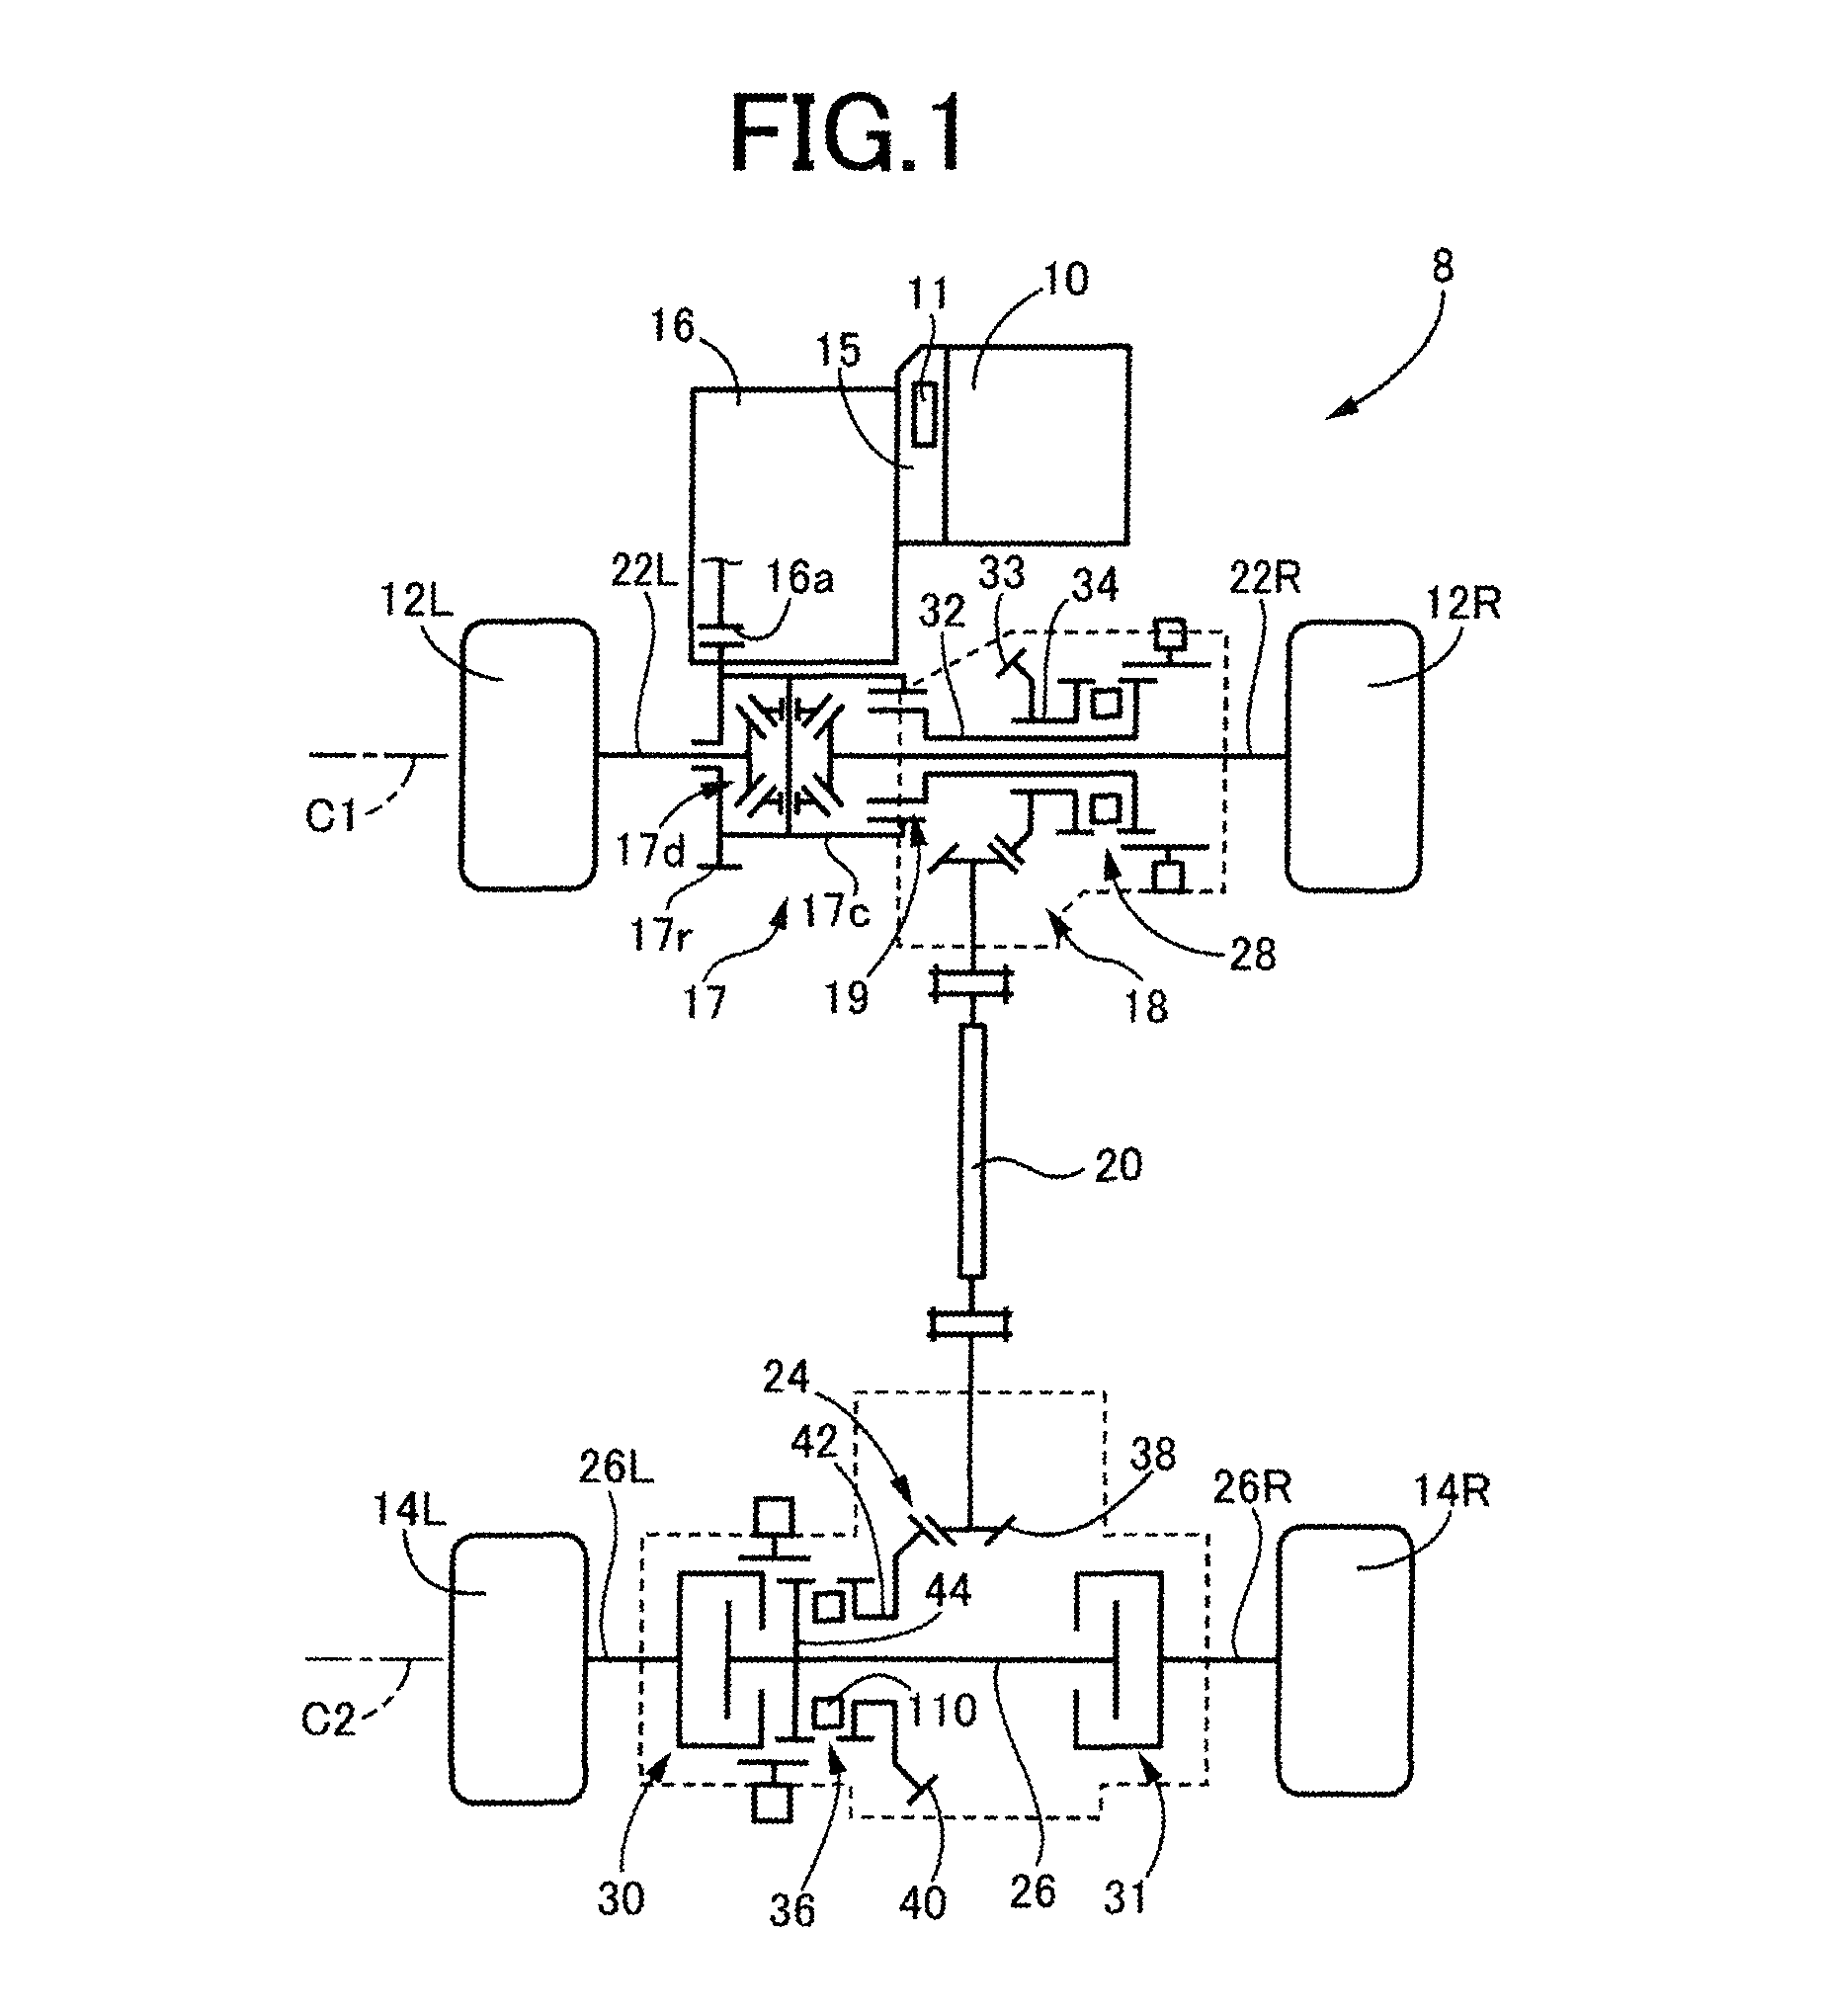 Control apparatus for a vehicular 4-wheel drive system